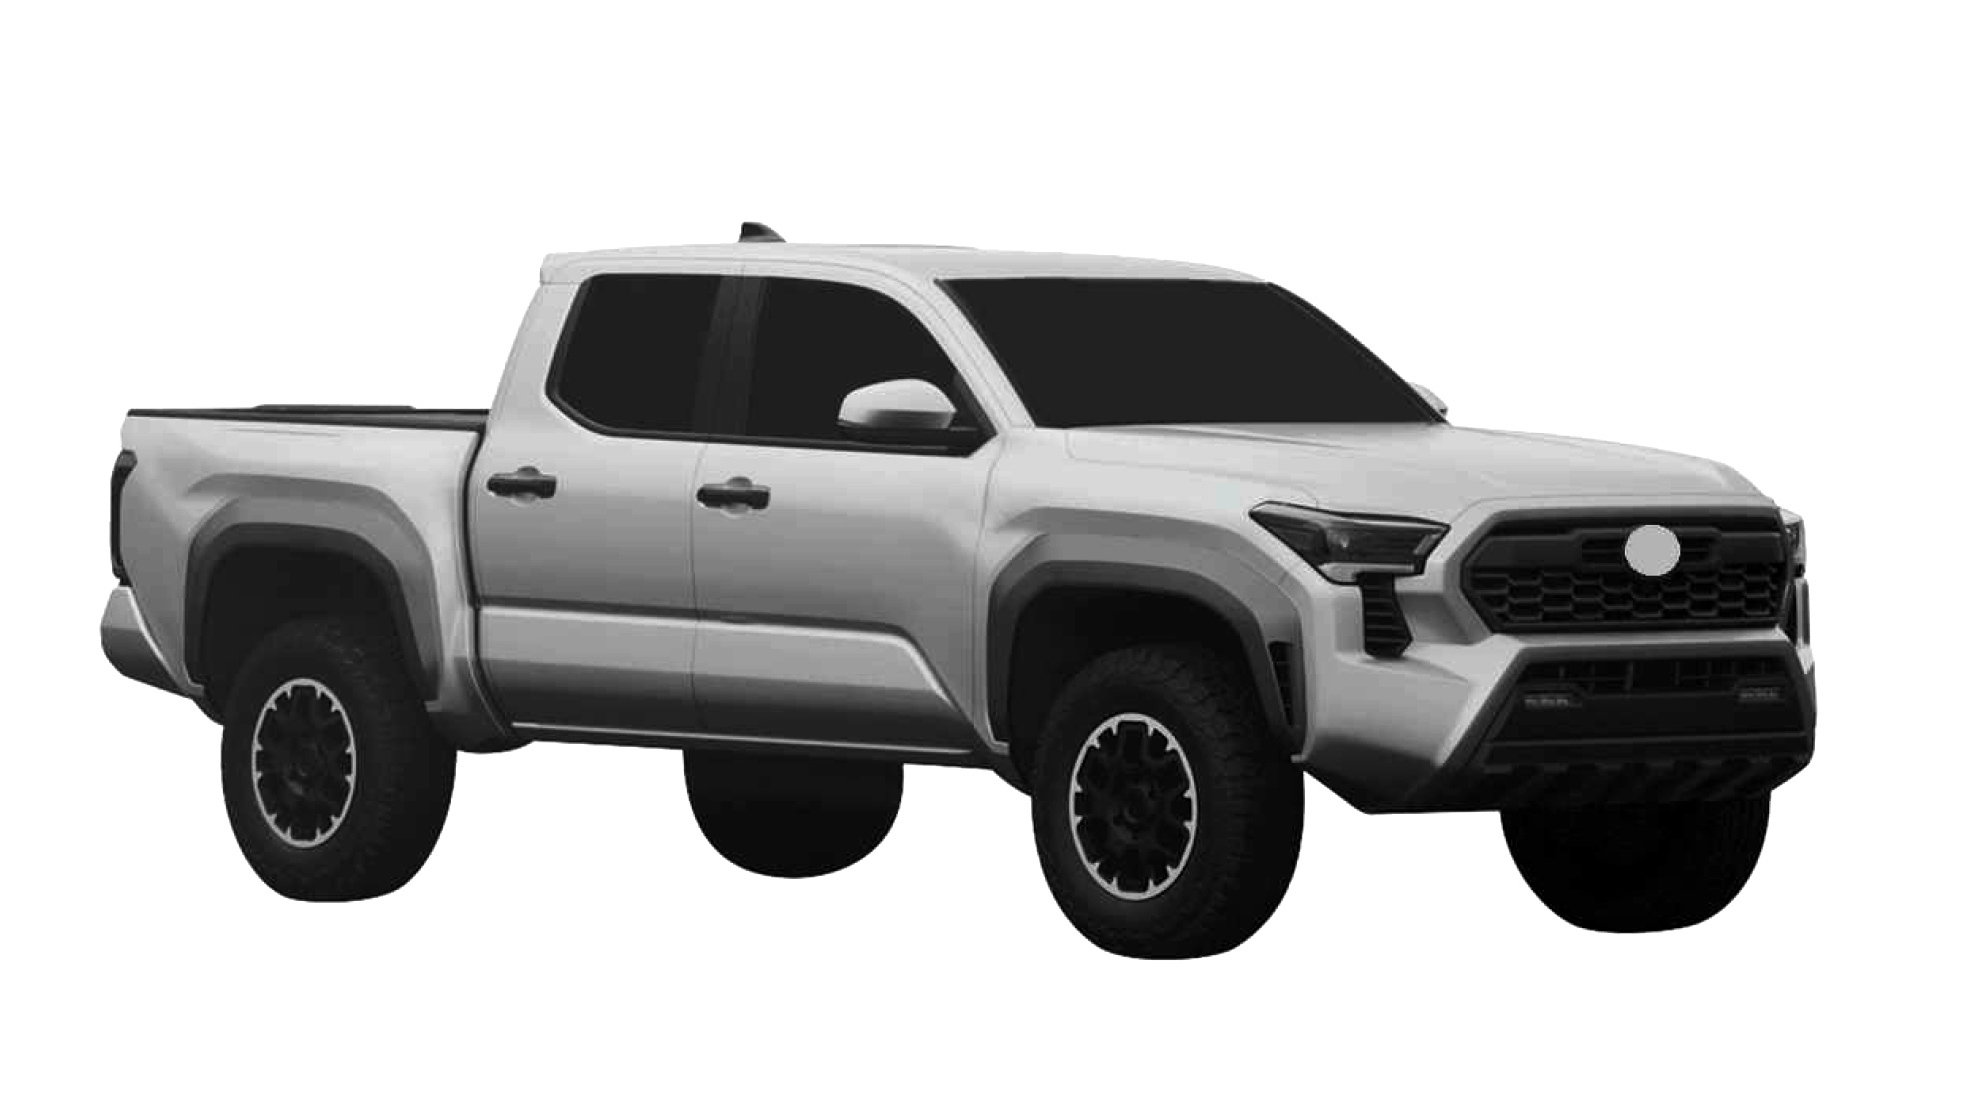 2024 Toyota Tacoma Revealed In Patent Photos, Looks Like A Smaller Tundra